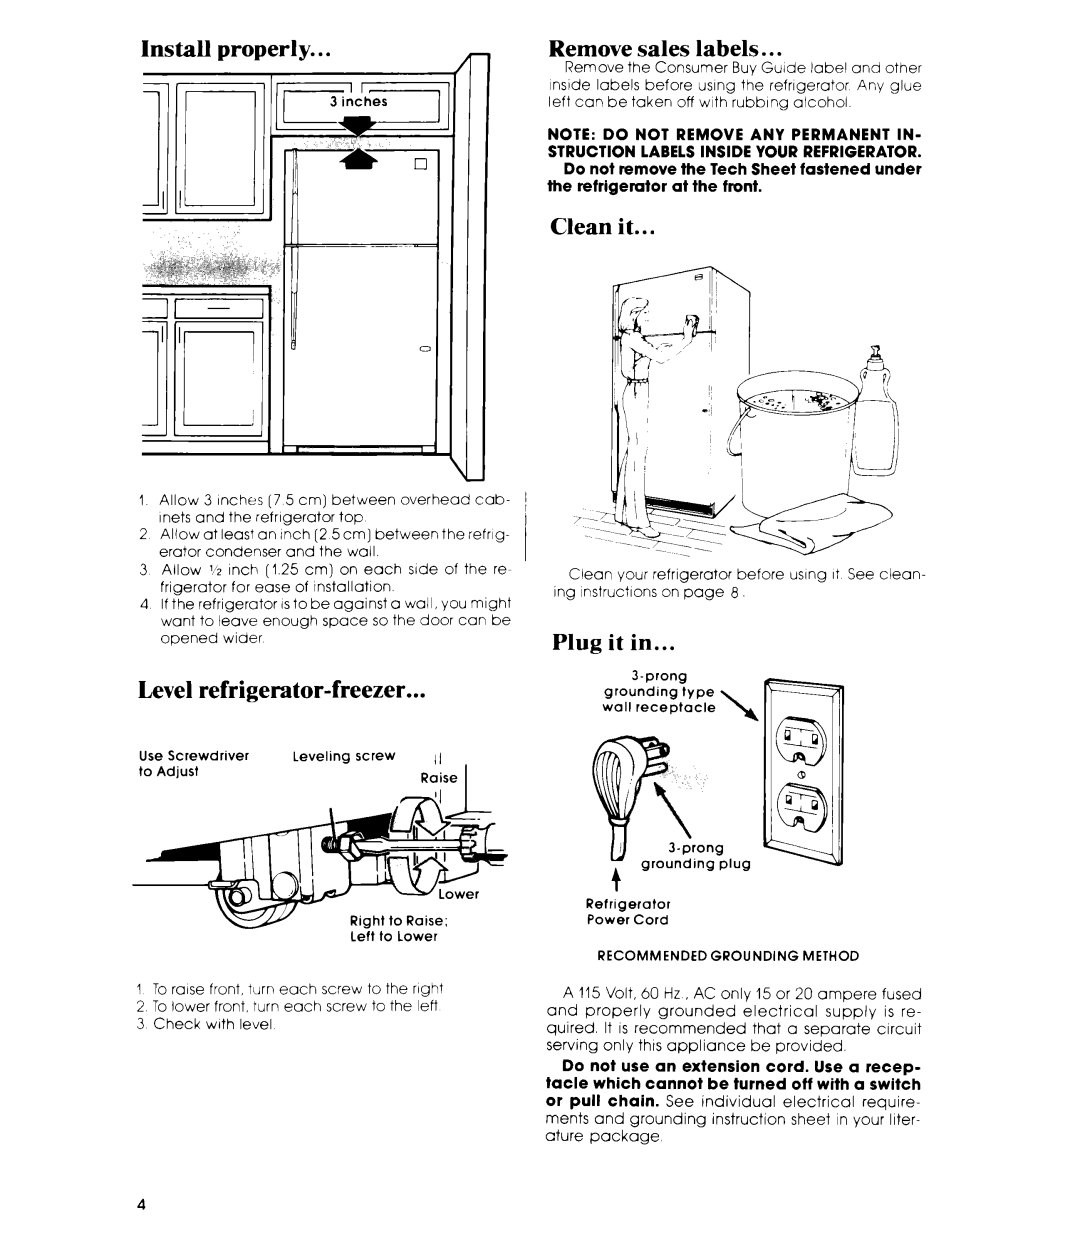 Whirlpool ETl8CK manual Install properly, Level refrigerator-freezer, Remove sales labels, Clean it, Plug it in 